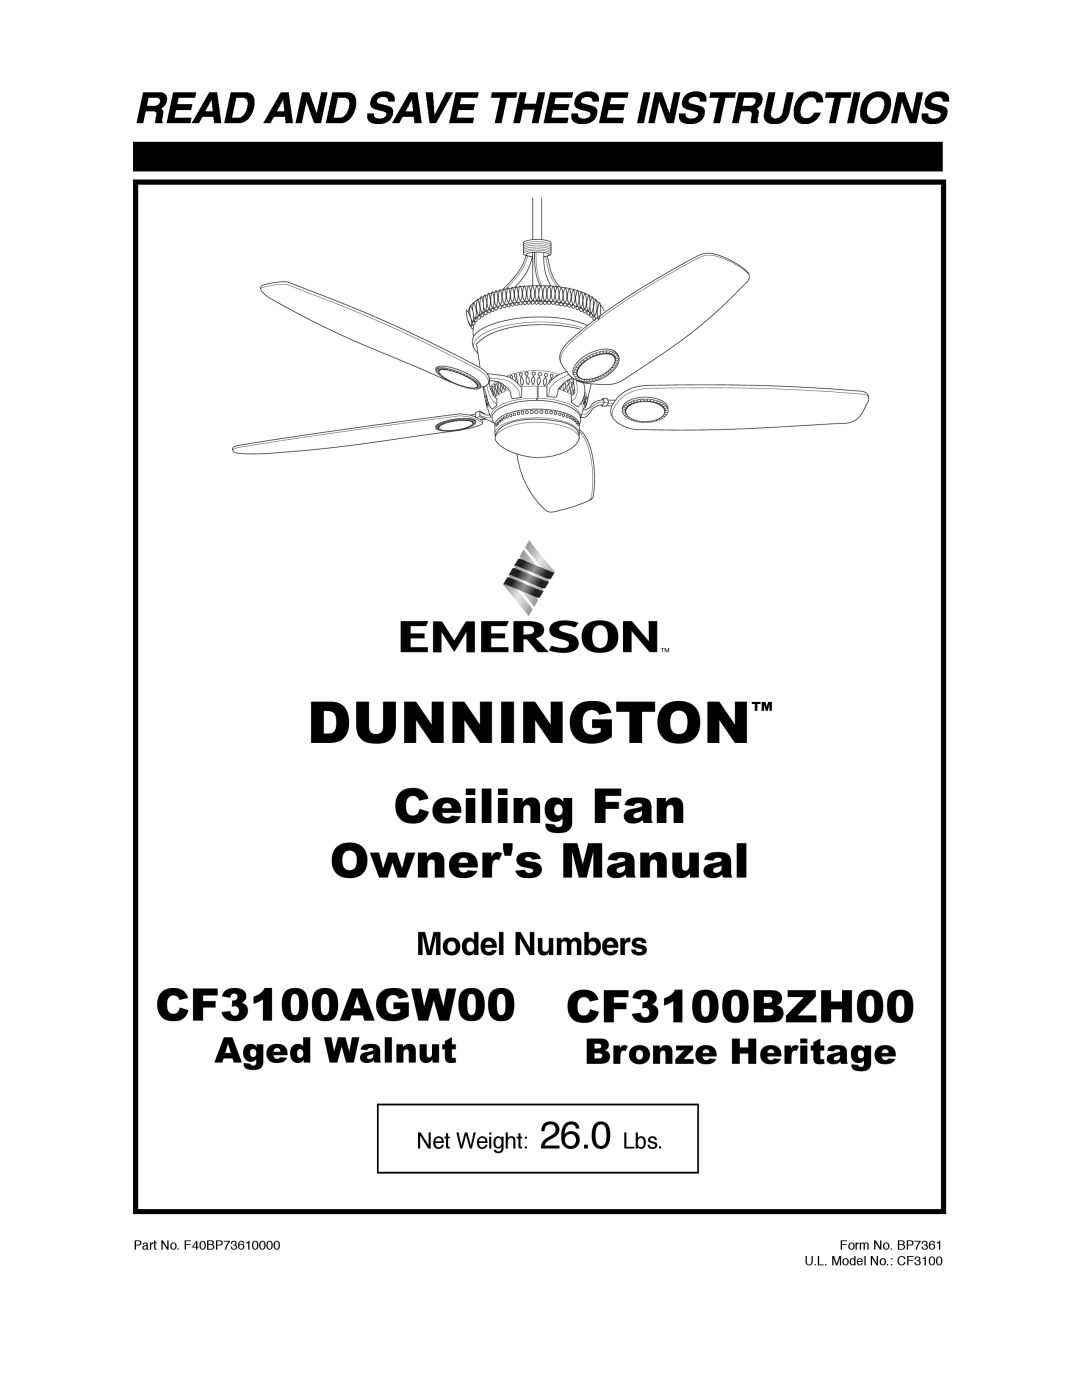 Emerson owner manual Dunnington, Ceiling Fan Owners Manual, CF3100AGW00 CF3100BZH00, Read And Save These Instructions 